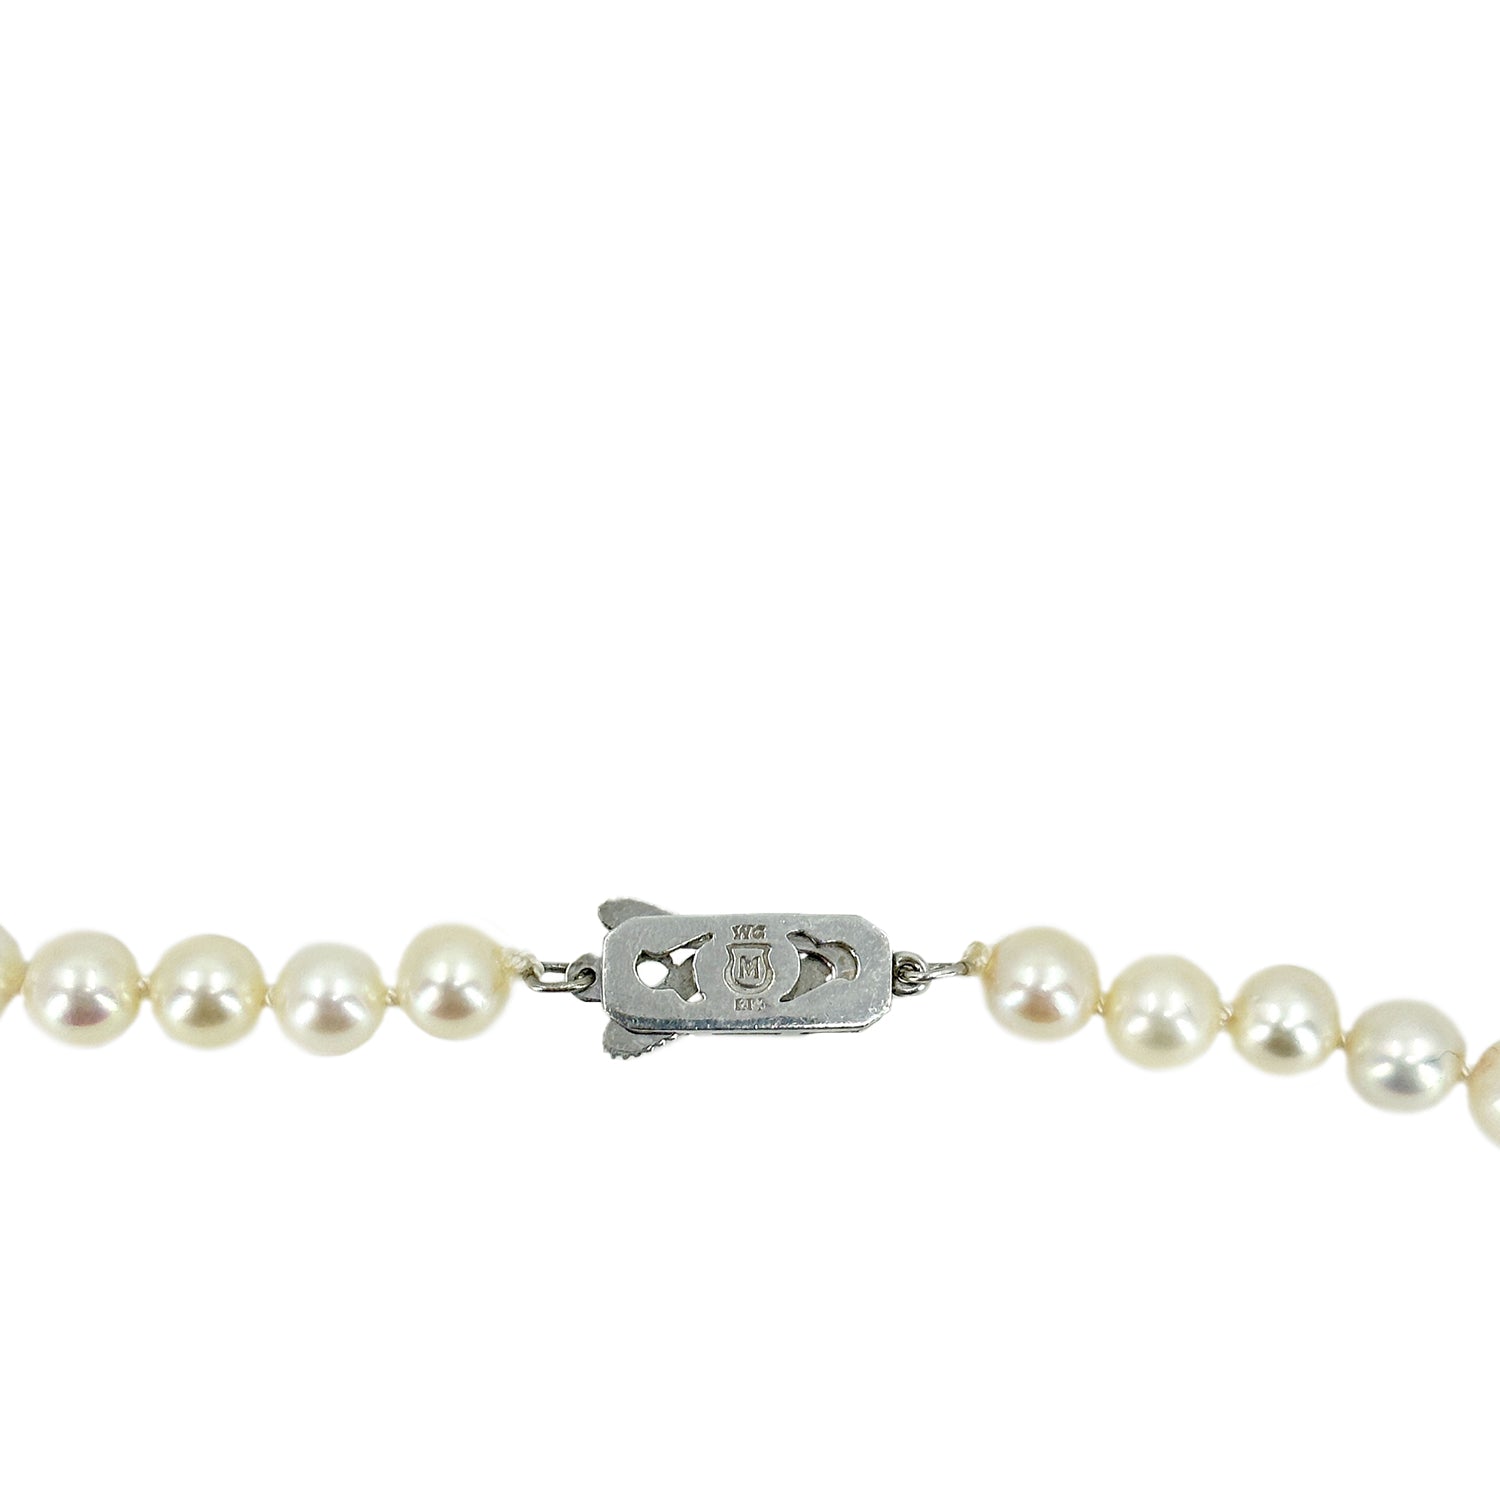 Large Mikimoto Japanese Cultured Akoya Pearl Vintage Strand Necklace- 14K White Gold 22 Inch